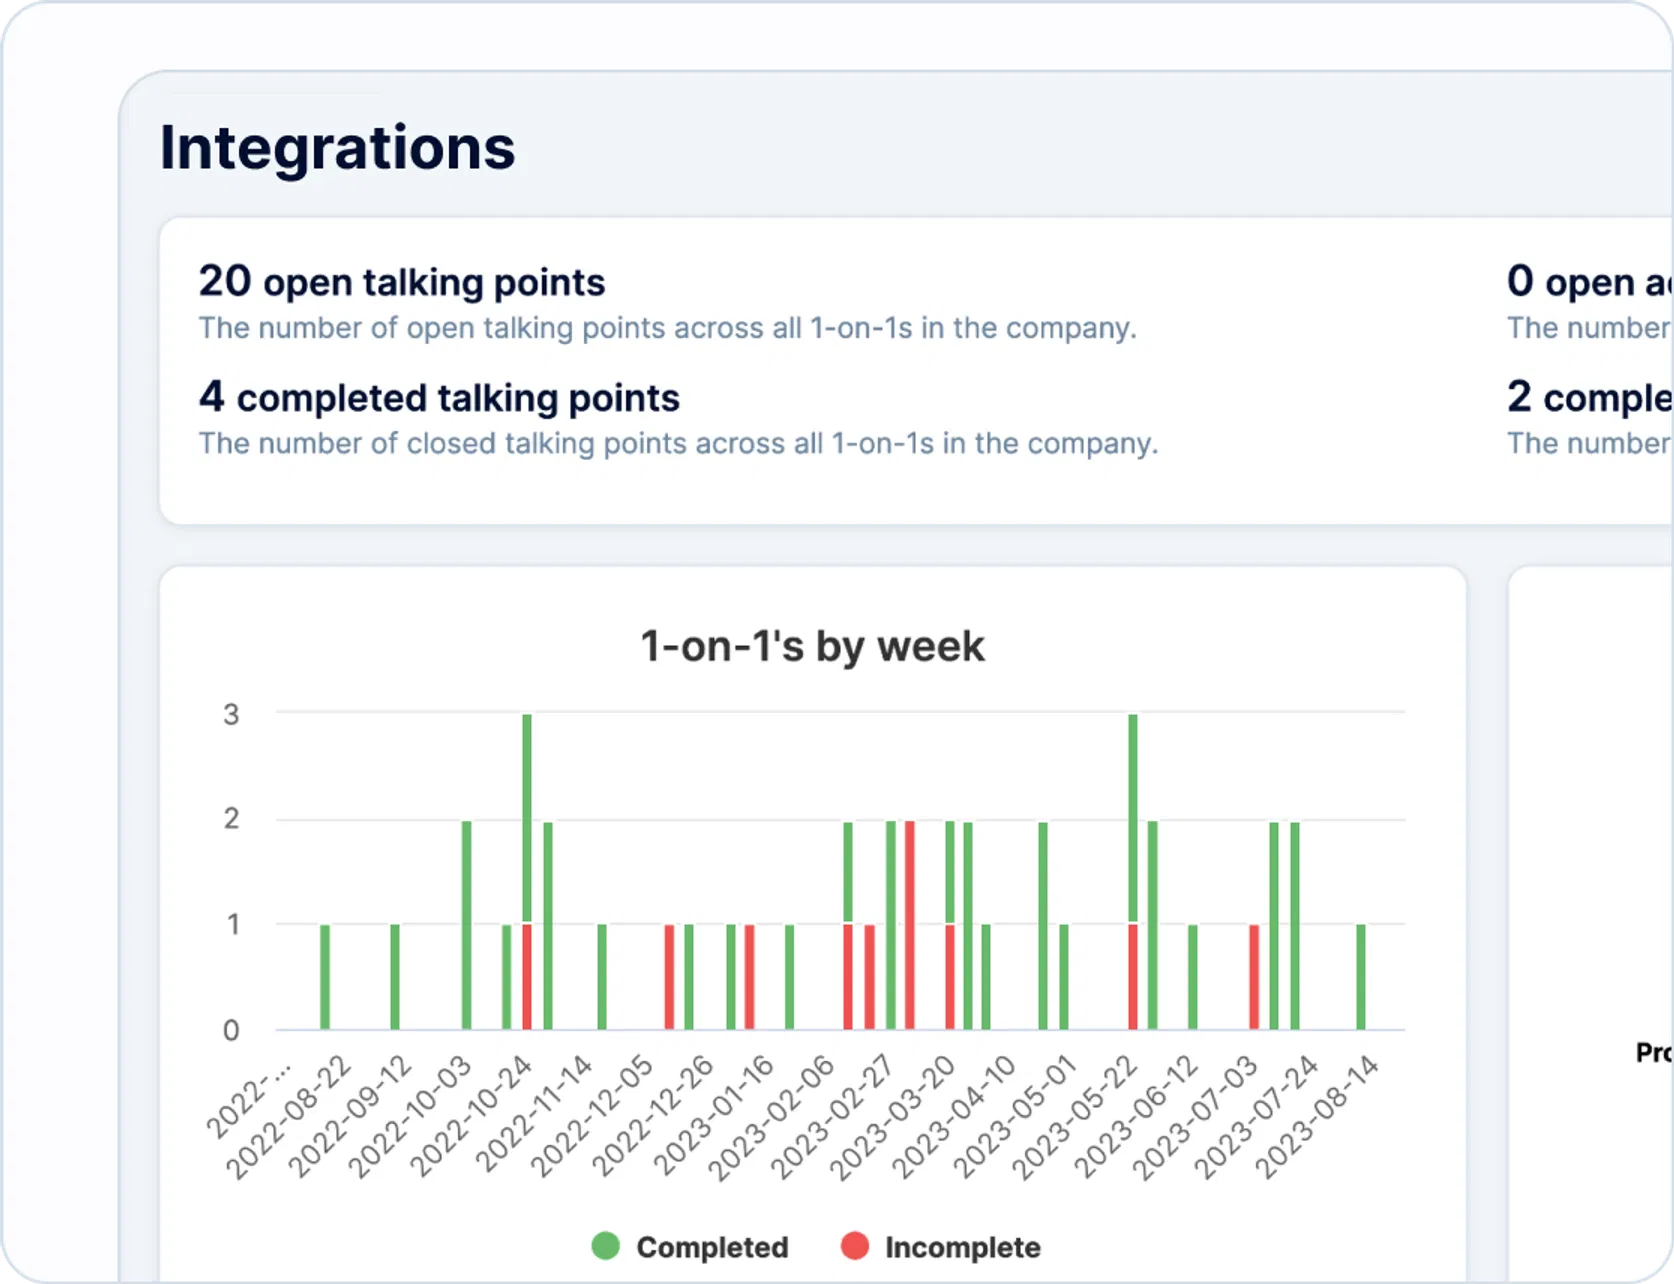 Analytics of 1-on-1 meetings conduction